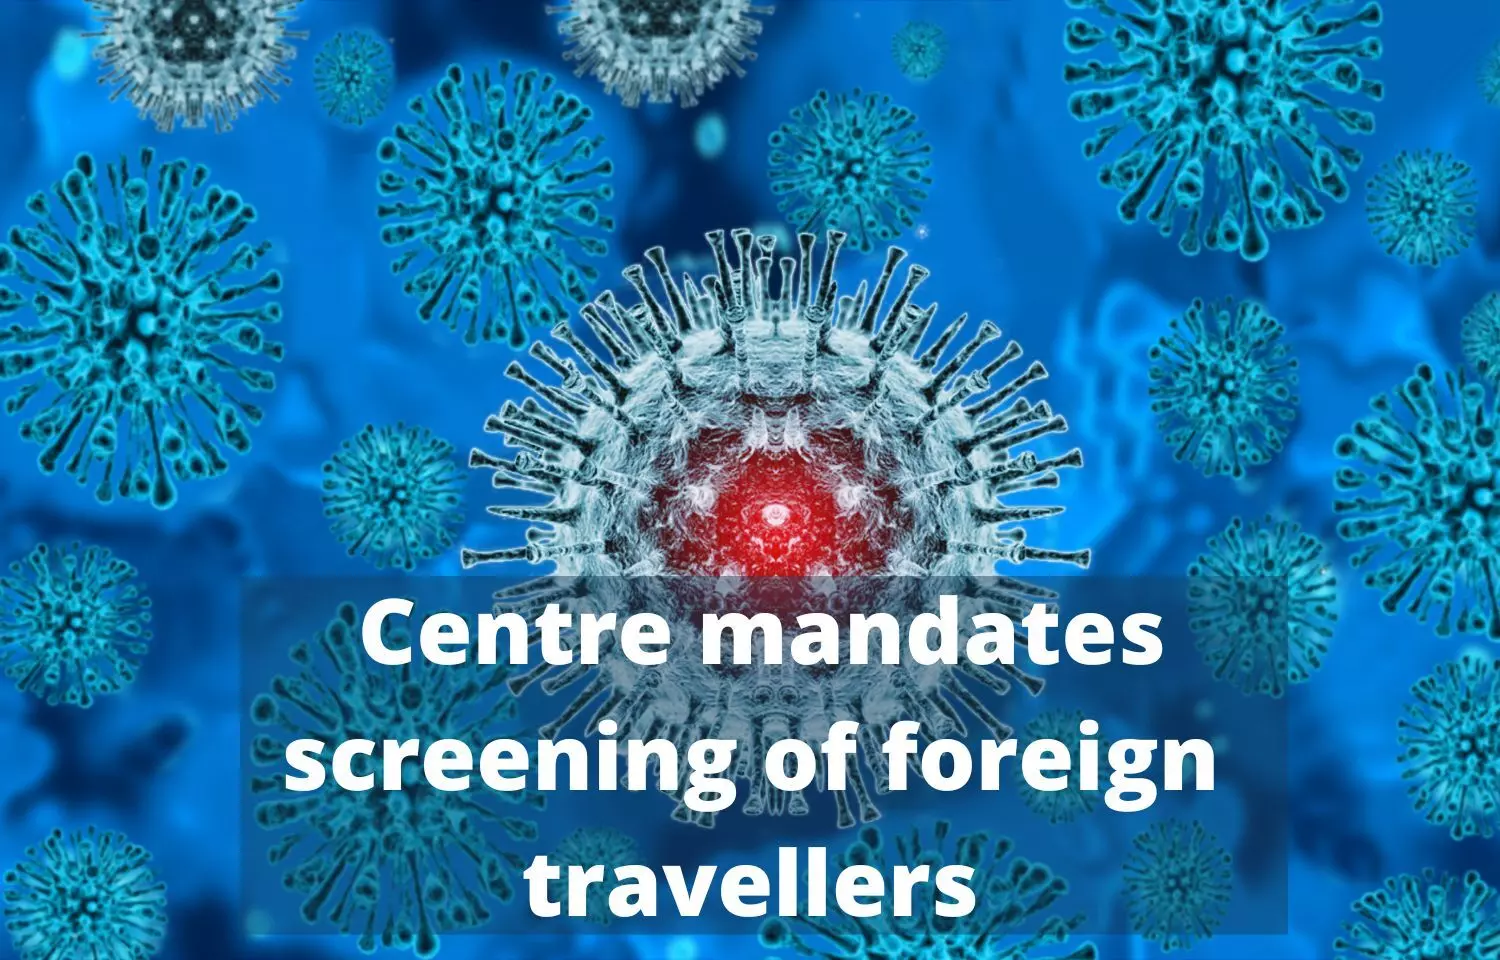 After second monkey pox case Centre mandates screening of foreign travellers